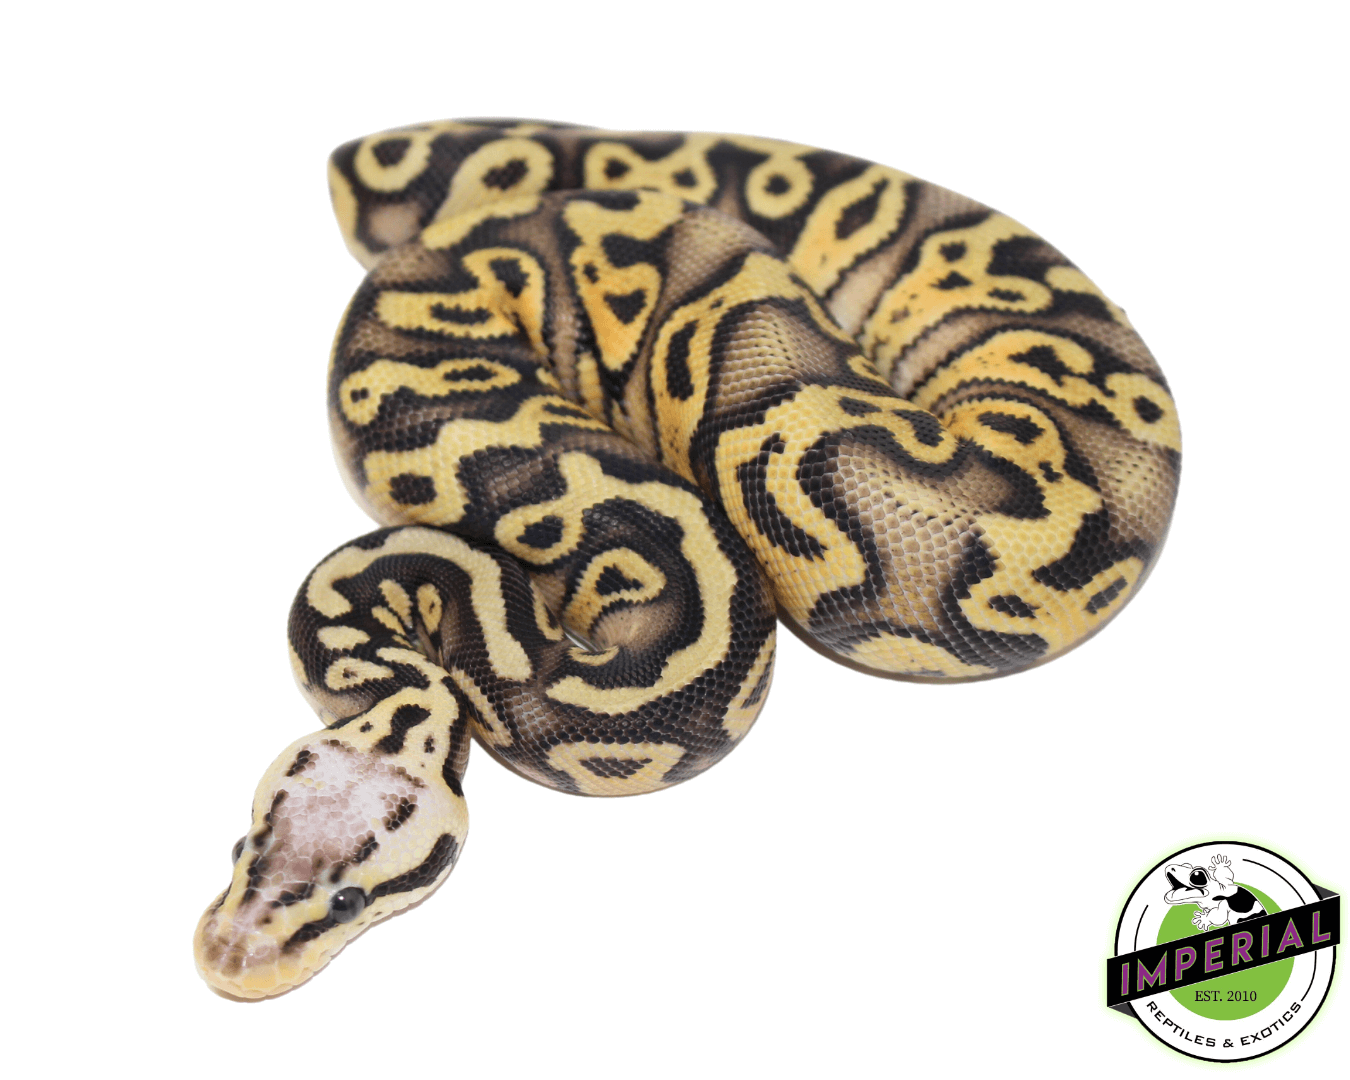 Superfly Gravel ball python for sale, buy reptiles online